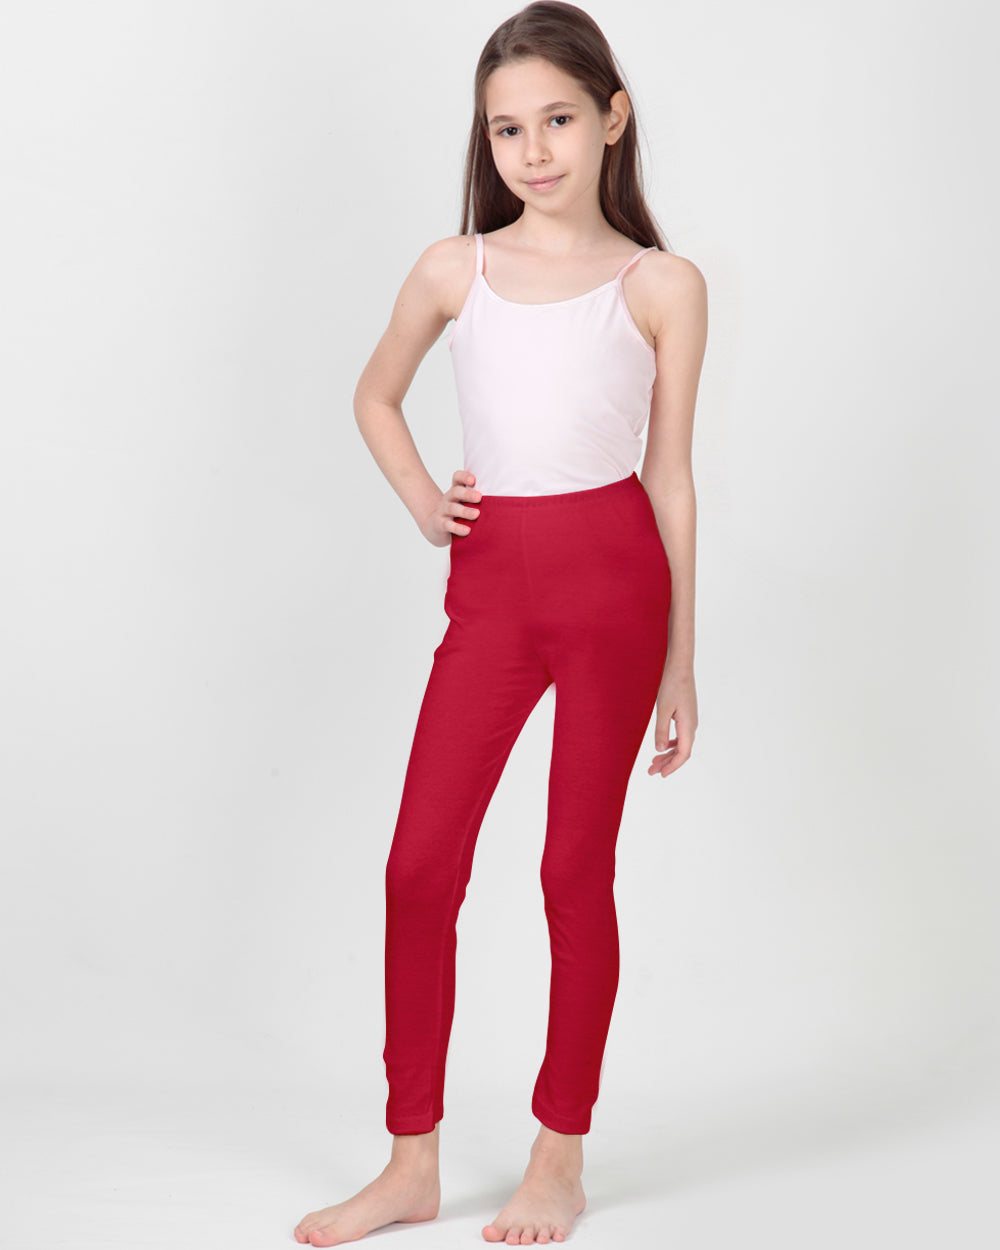 Red High Waist Ankle Length Lycra Cotton Legging, Casual Wear